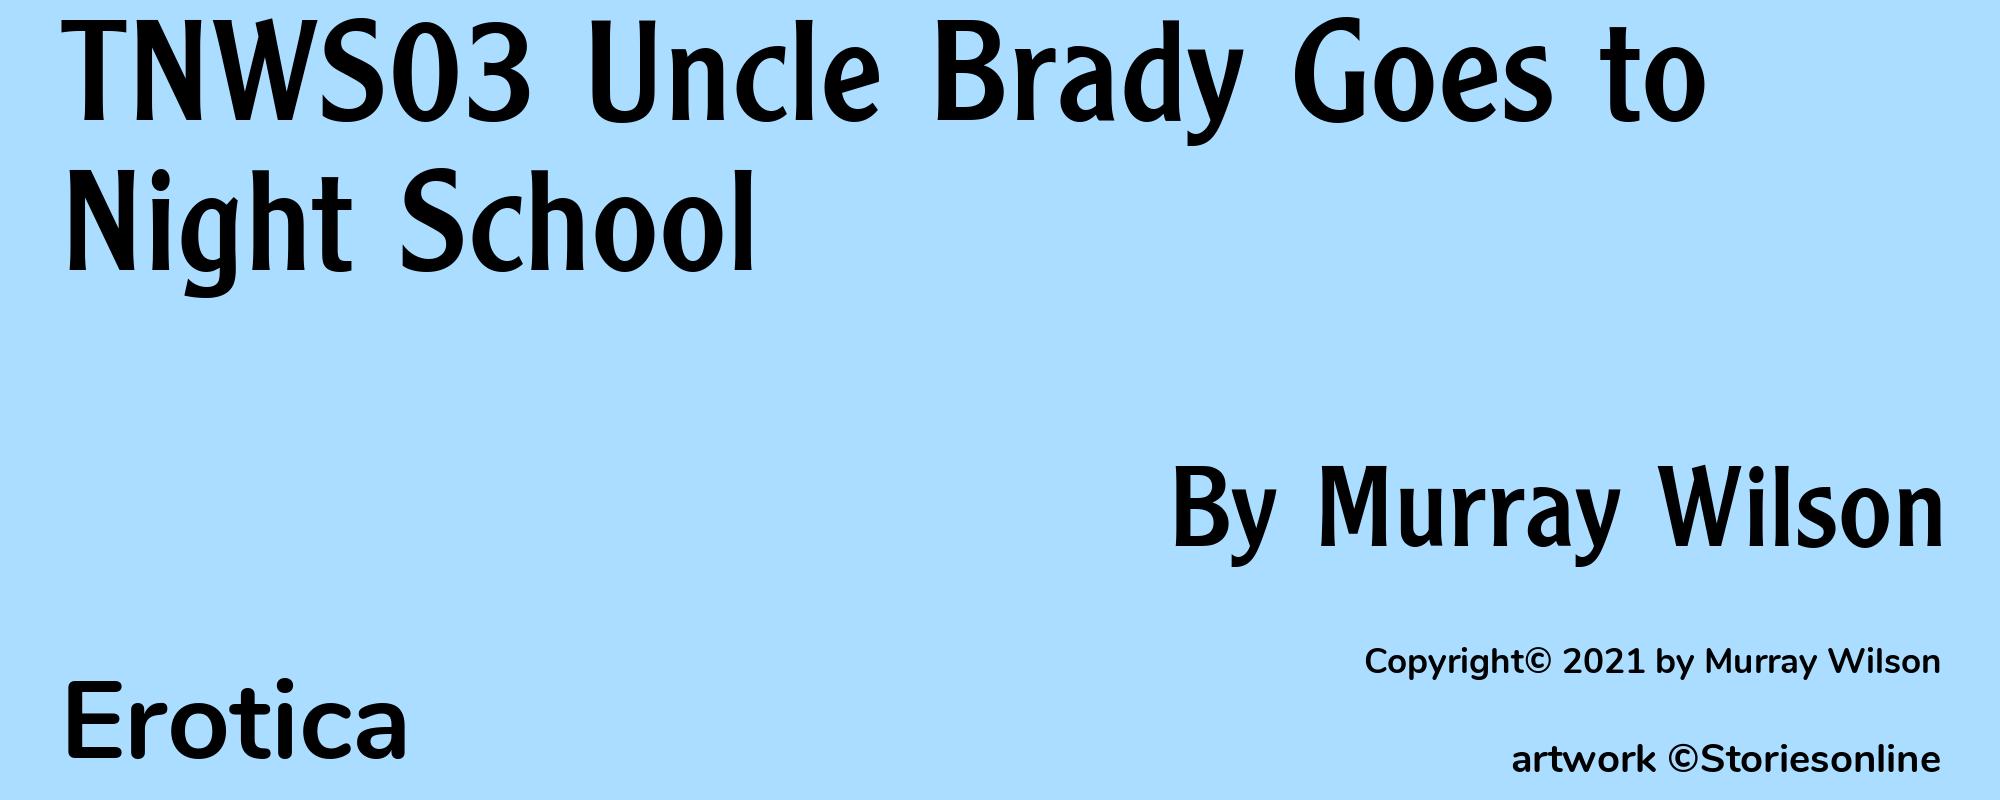 TNWS03 Uncle Brady Goes to Night School - Cover